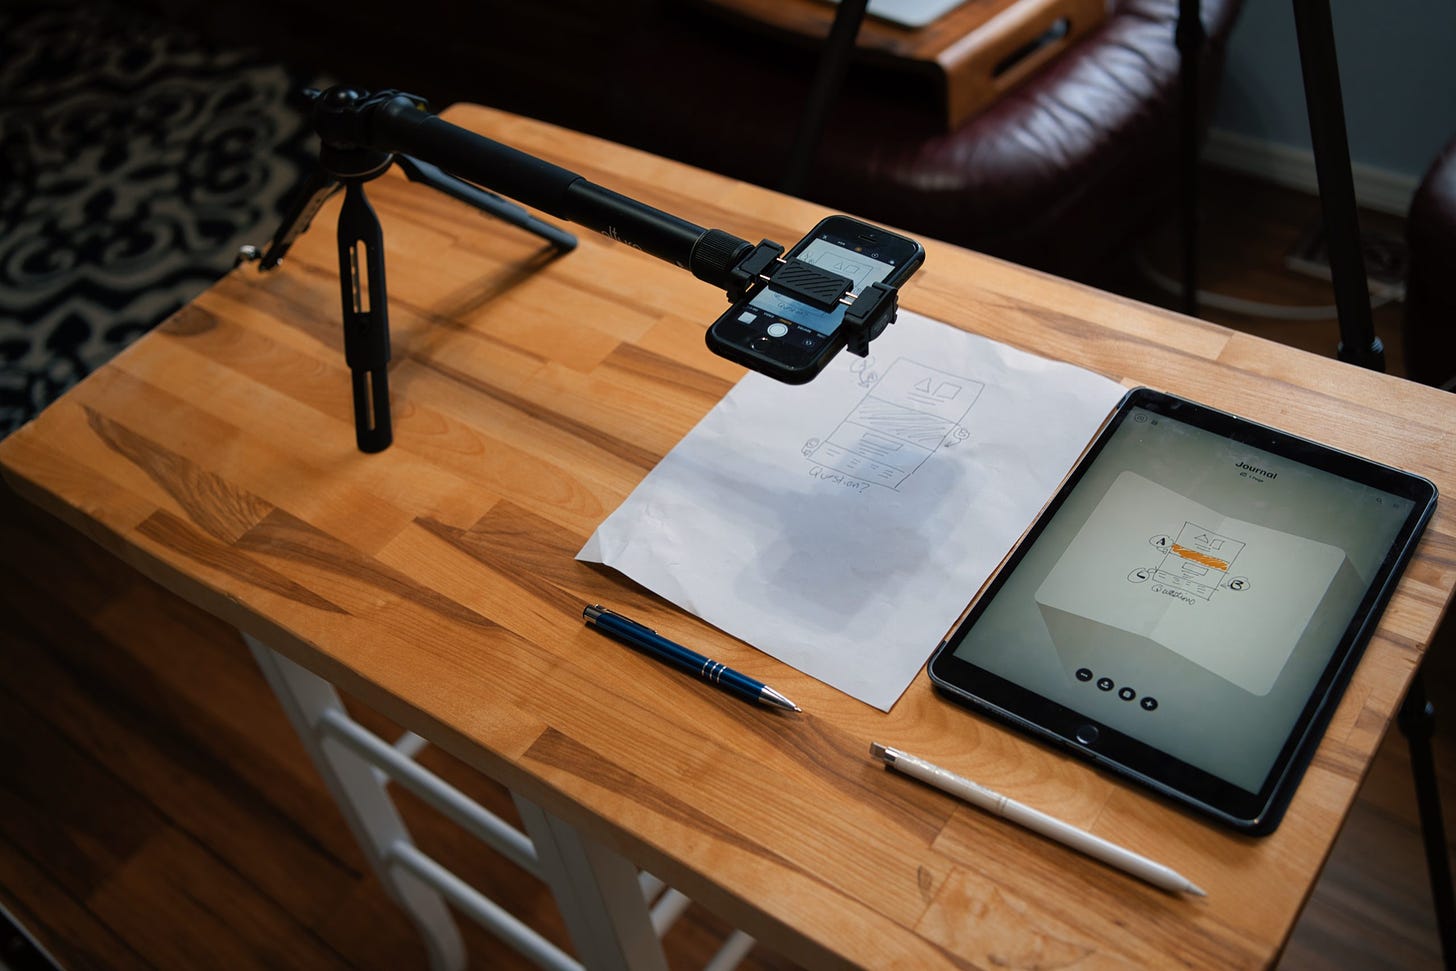 From an angle: Overhead shot of tripod with extnesion holding an iPhone with the video camera app open, paper and pen below it, iPad pro and pencil beside it